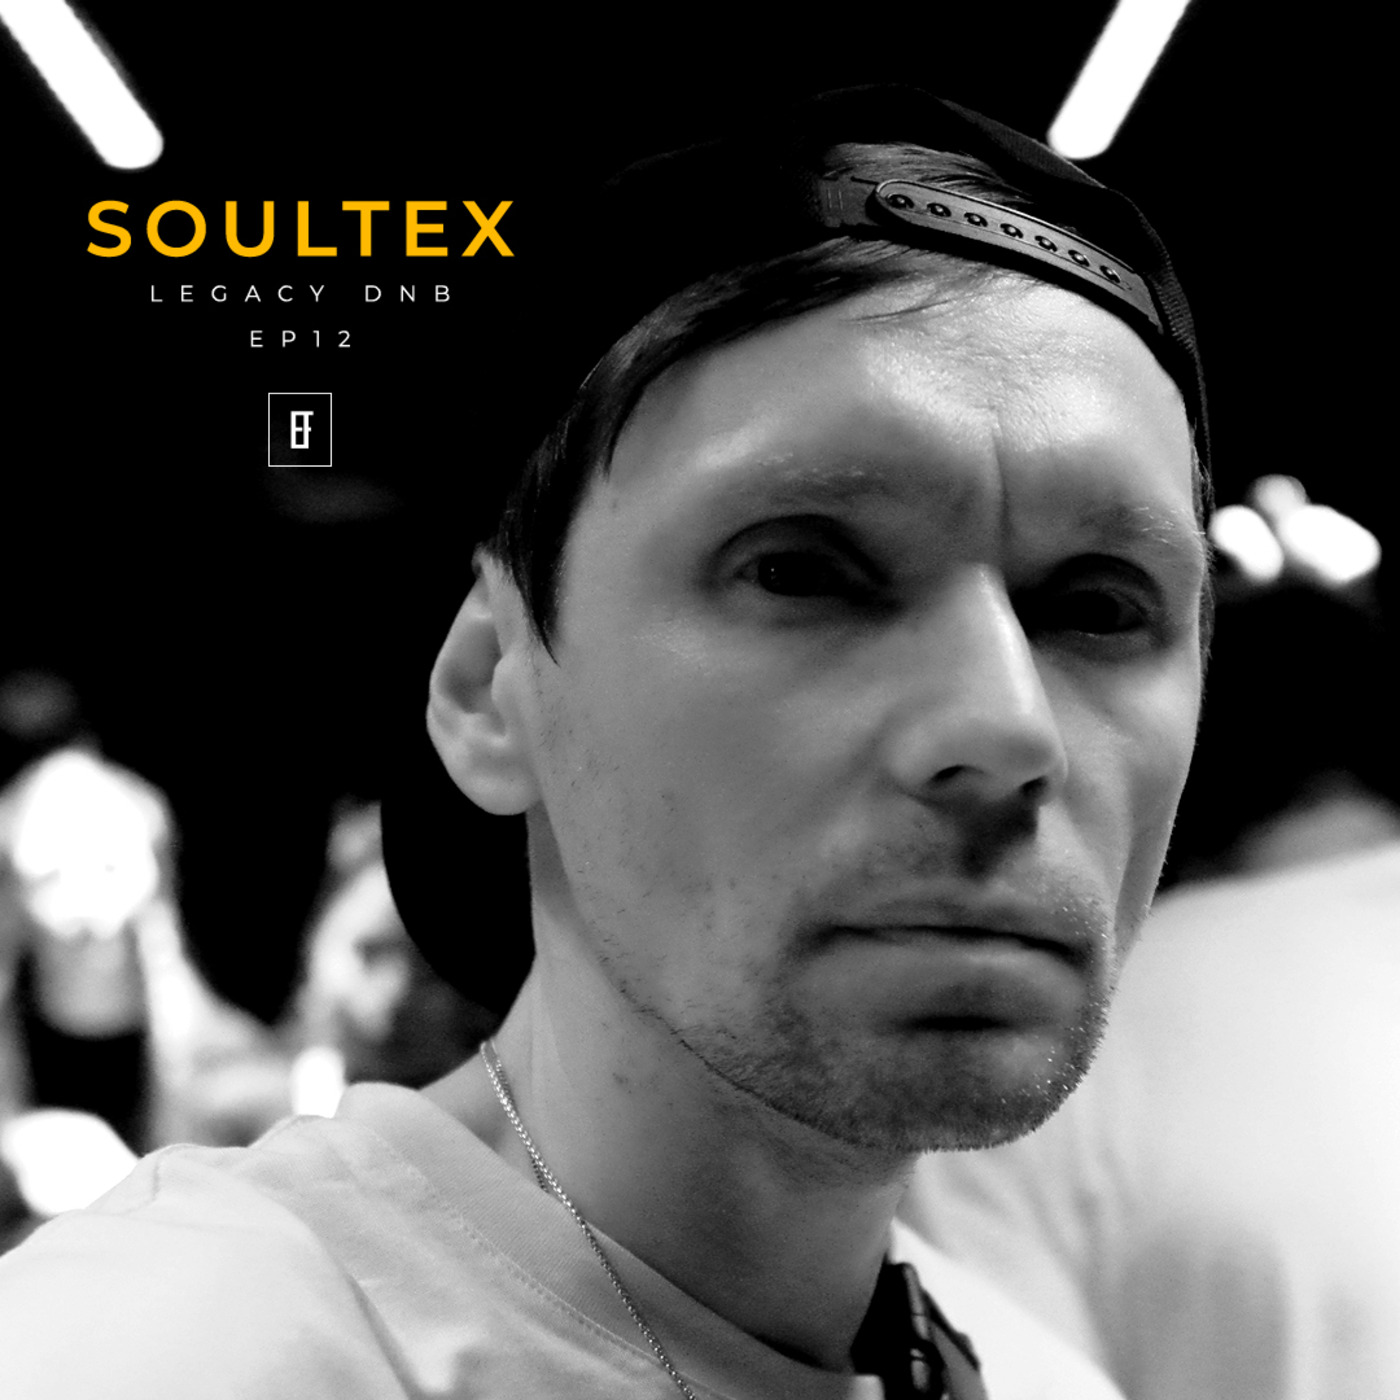 Soultex - Legacy DNB Show Ep12 // East Forms Drum & Bass